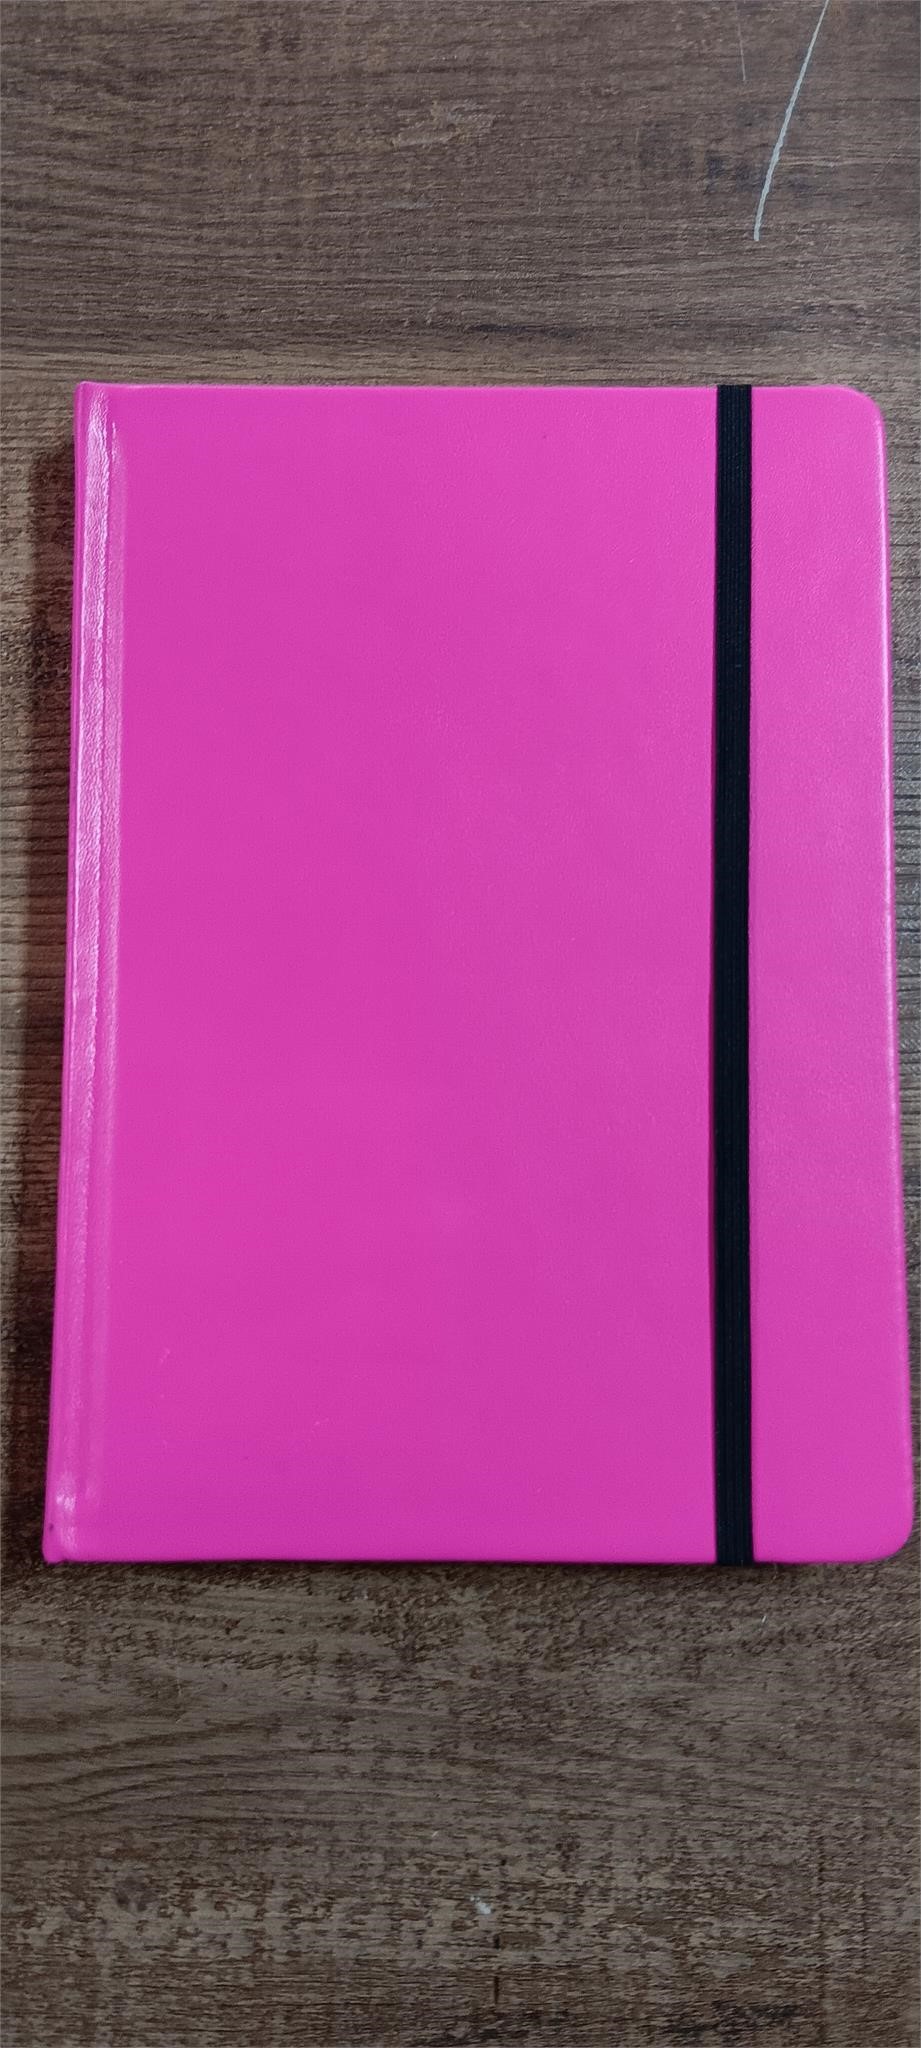 Pink JAM Hardcover Notebook with Elastic Band A17